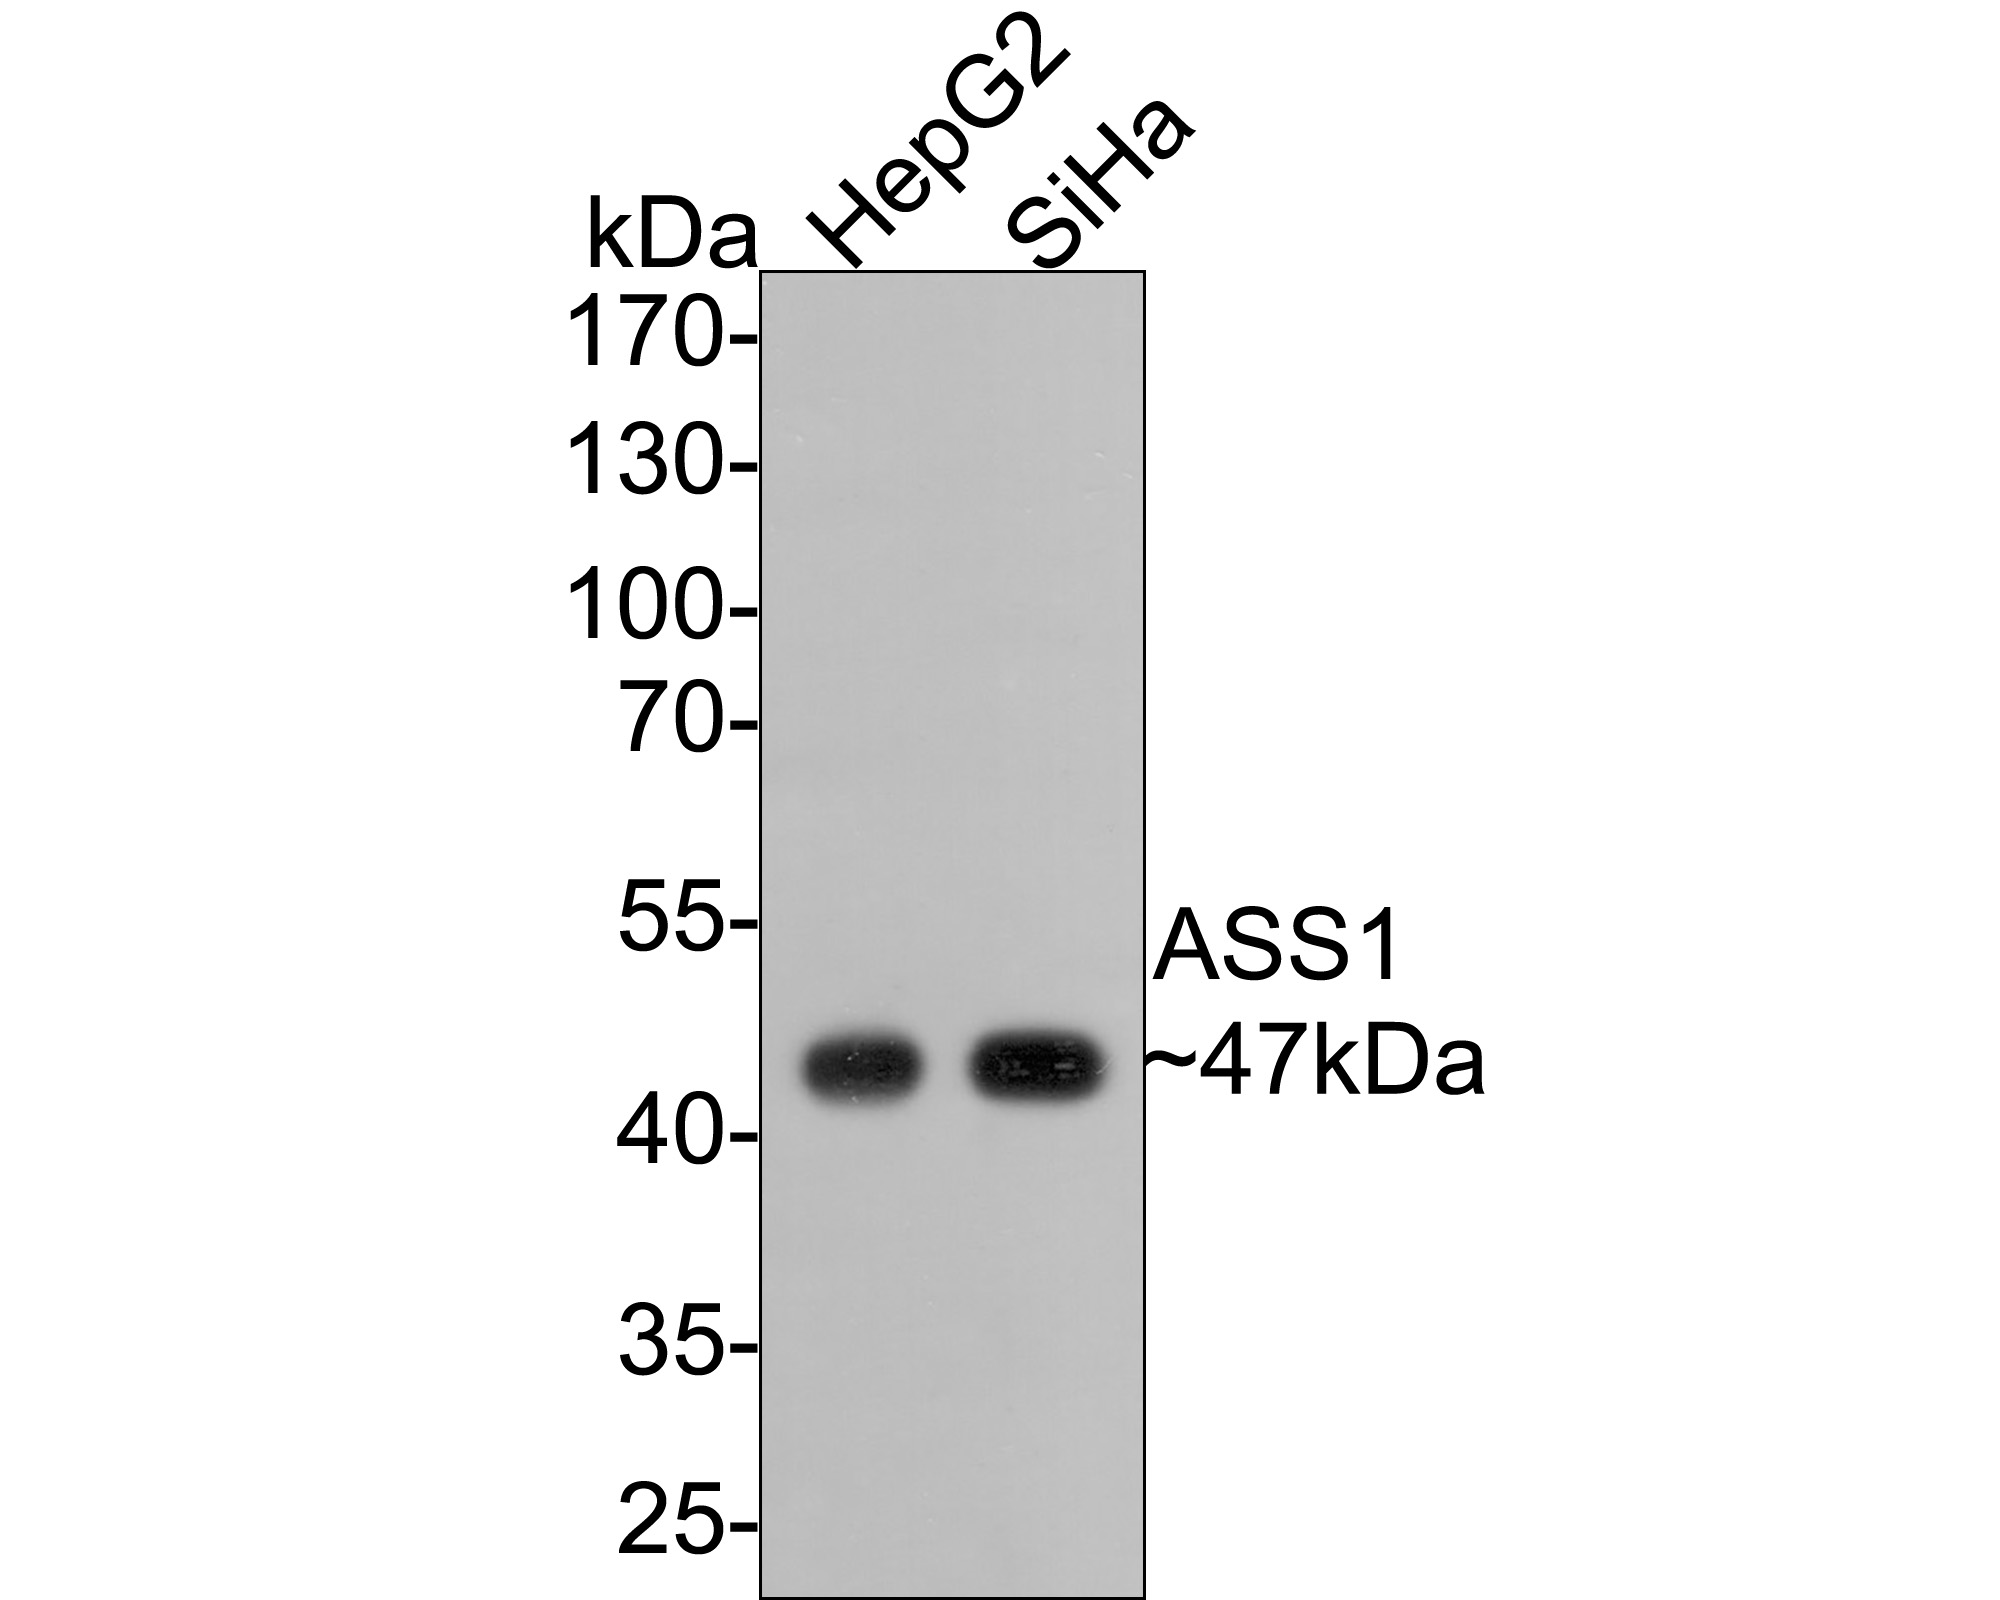 Western blot analysis of ASS1 on HepG2 (1) and SiHa (2) cell lysate using anti-ASS1 antibody at 1/1,000 dilution.